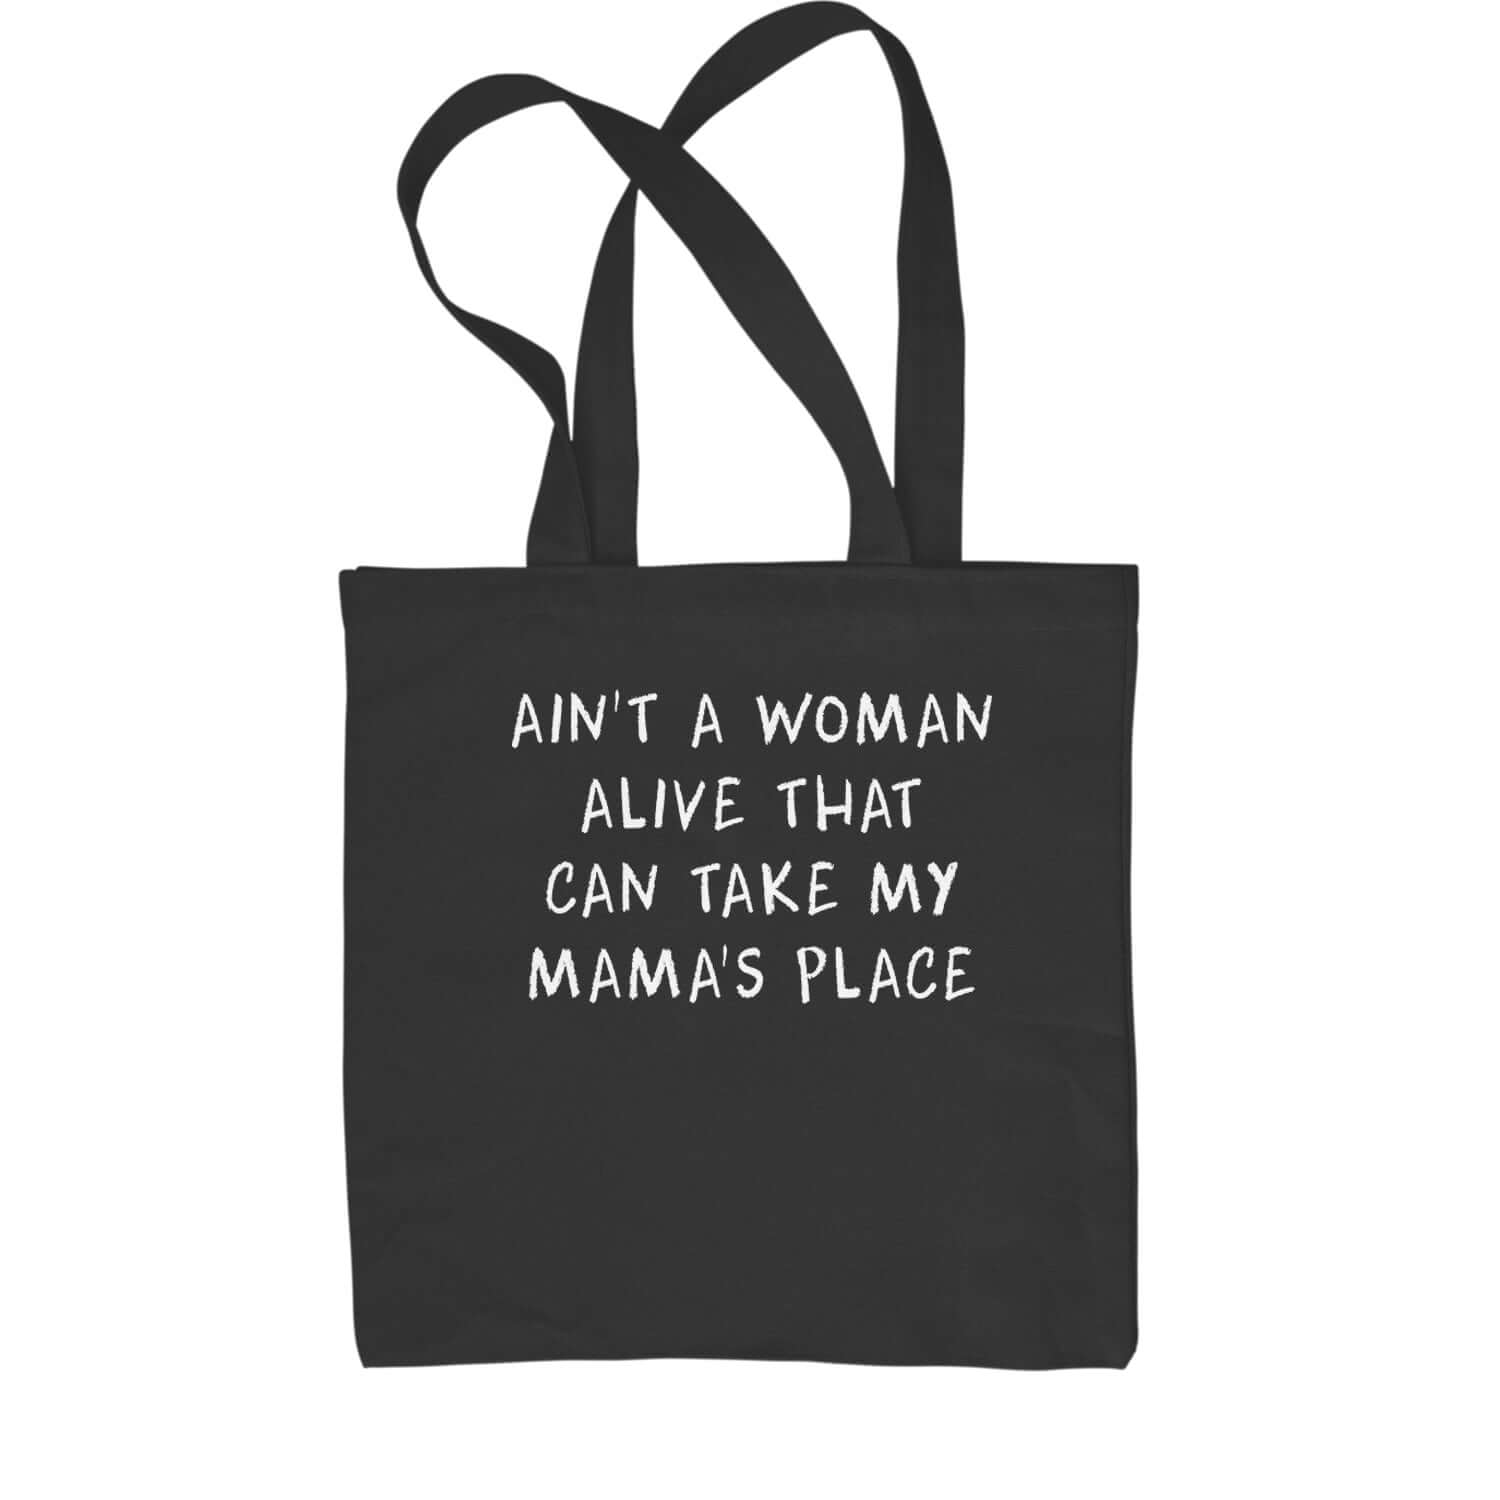 Ain't A Woman Alive That Can Take My Mama's Place Shopping Tote Bag 2pac, bear, day, mama, mom, mothers, shakur, tupac by Expression Tees